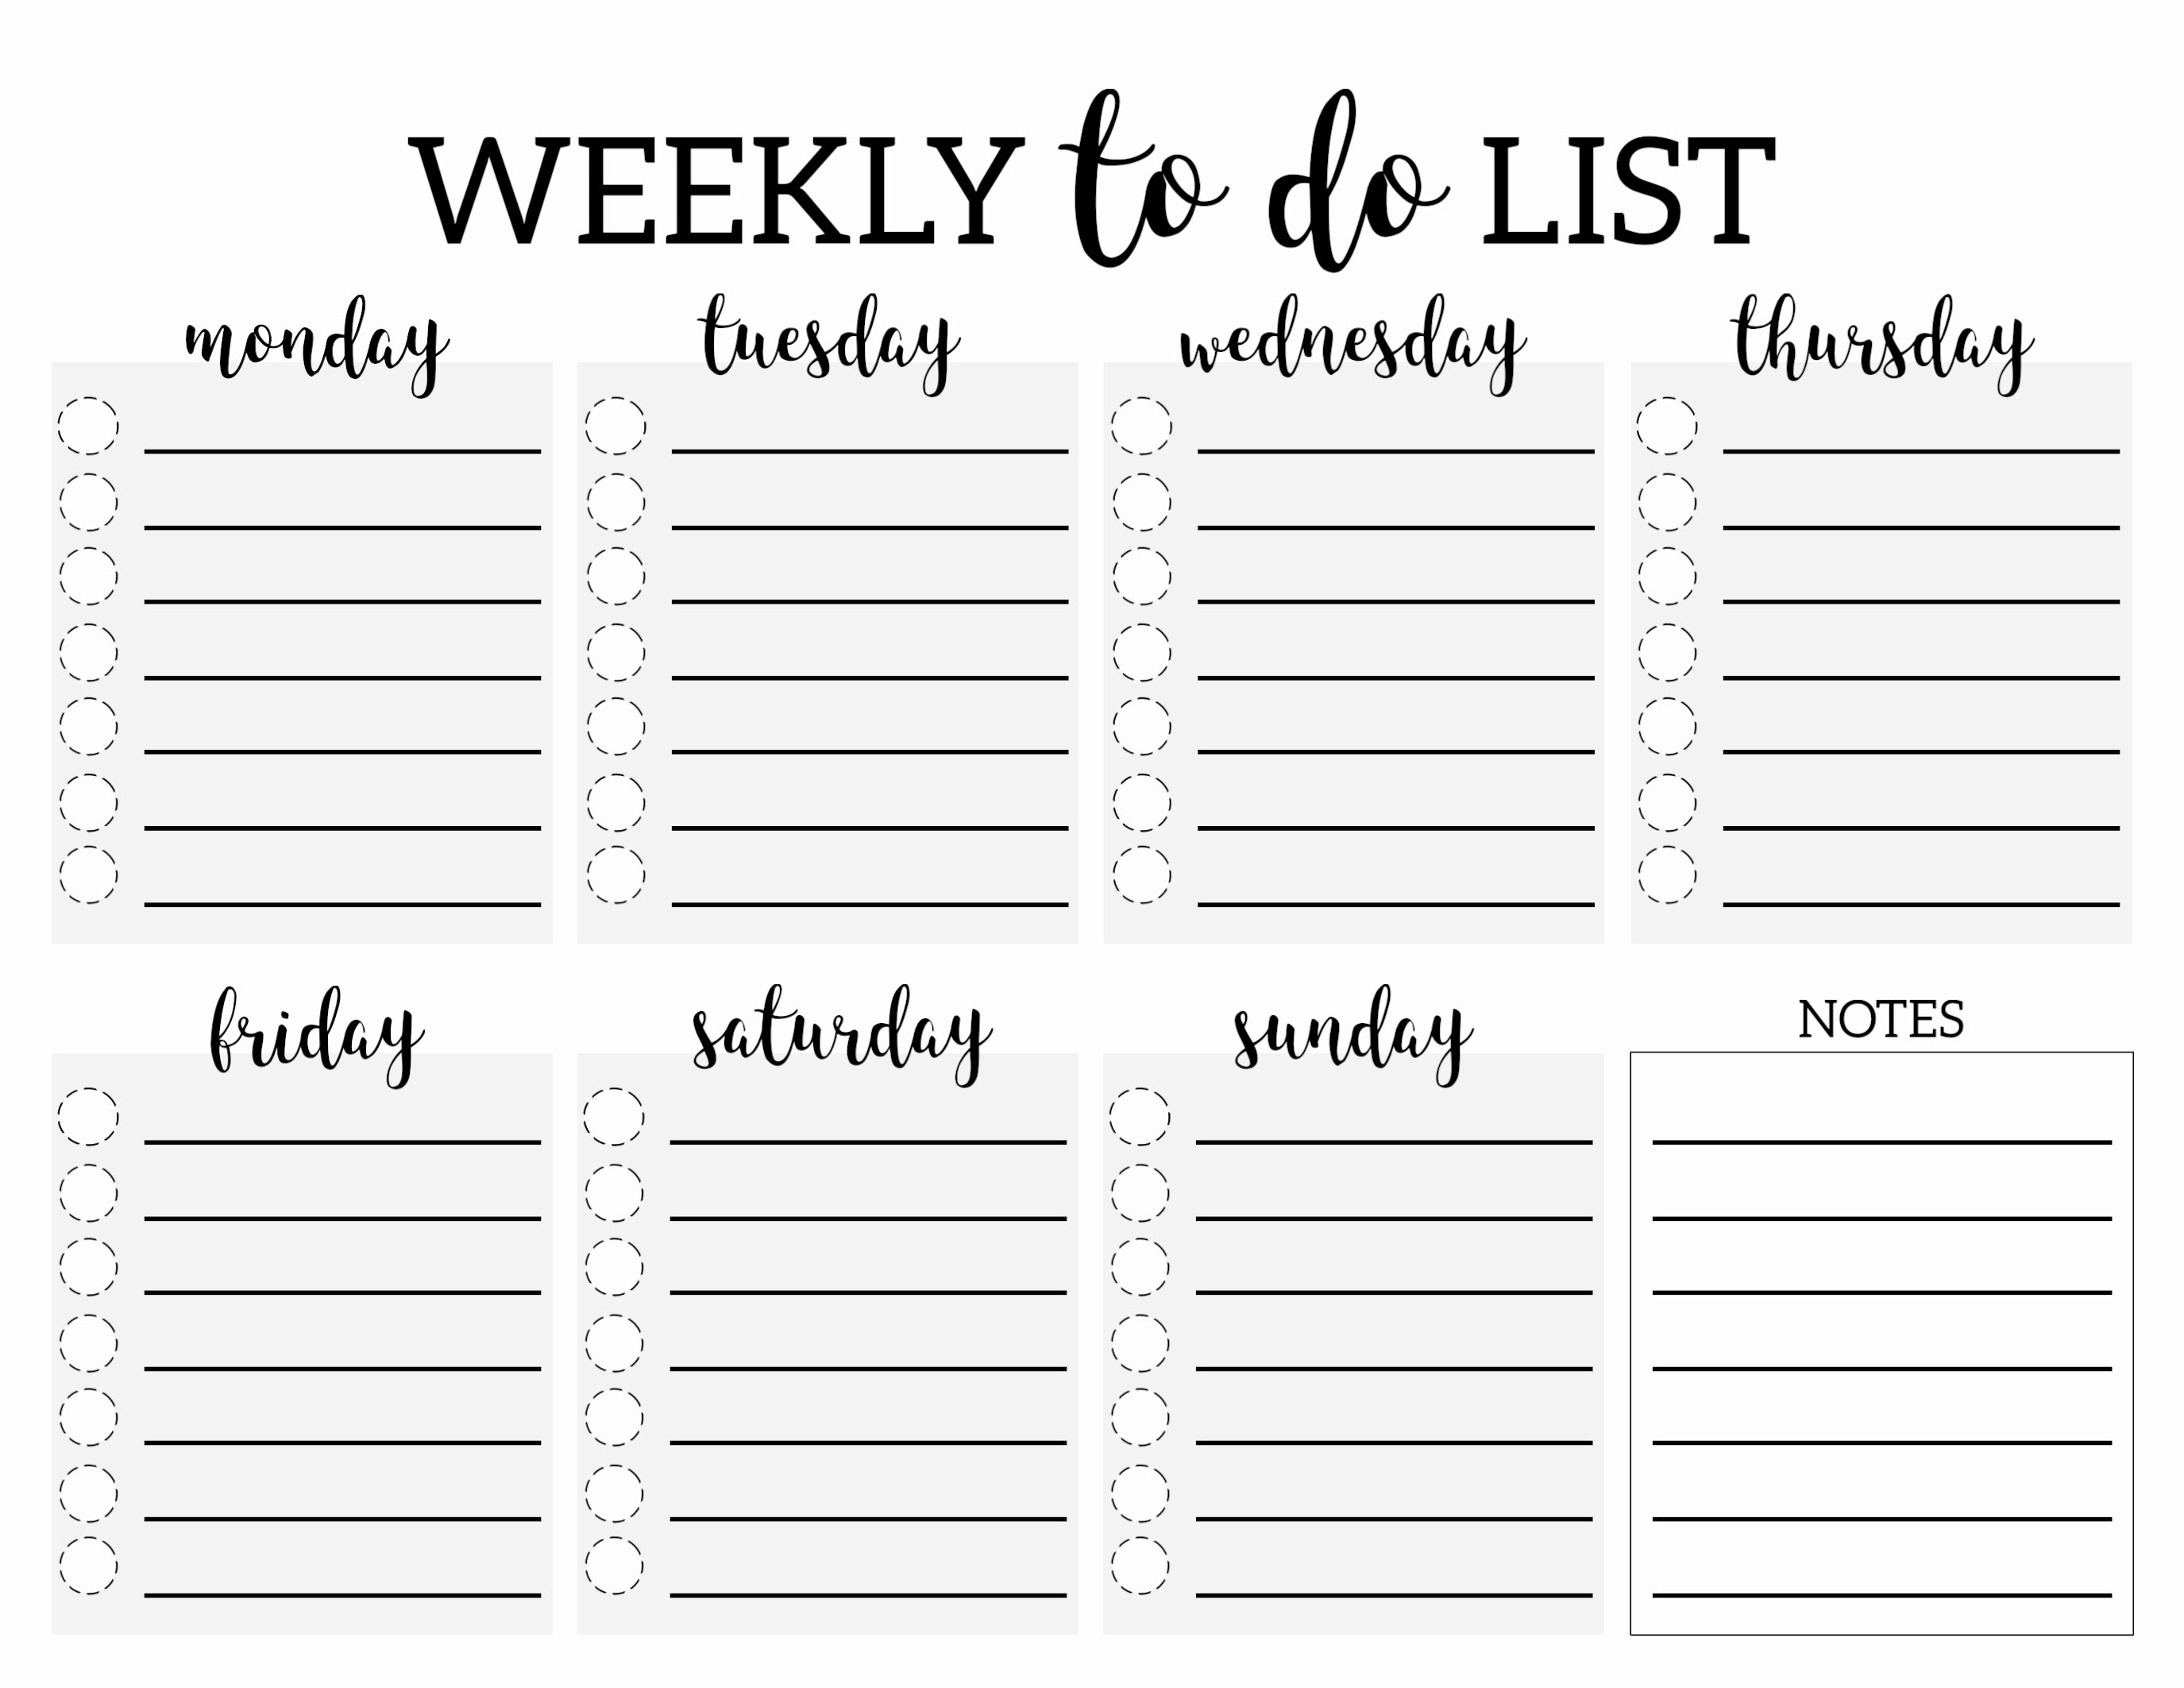 Weekly todo List Template Luxury Weekly to Do List Printable Checklist Template Paper